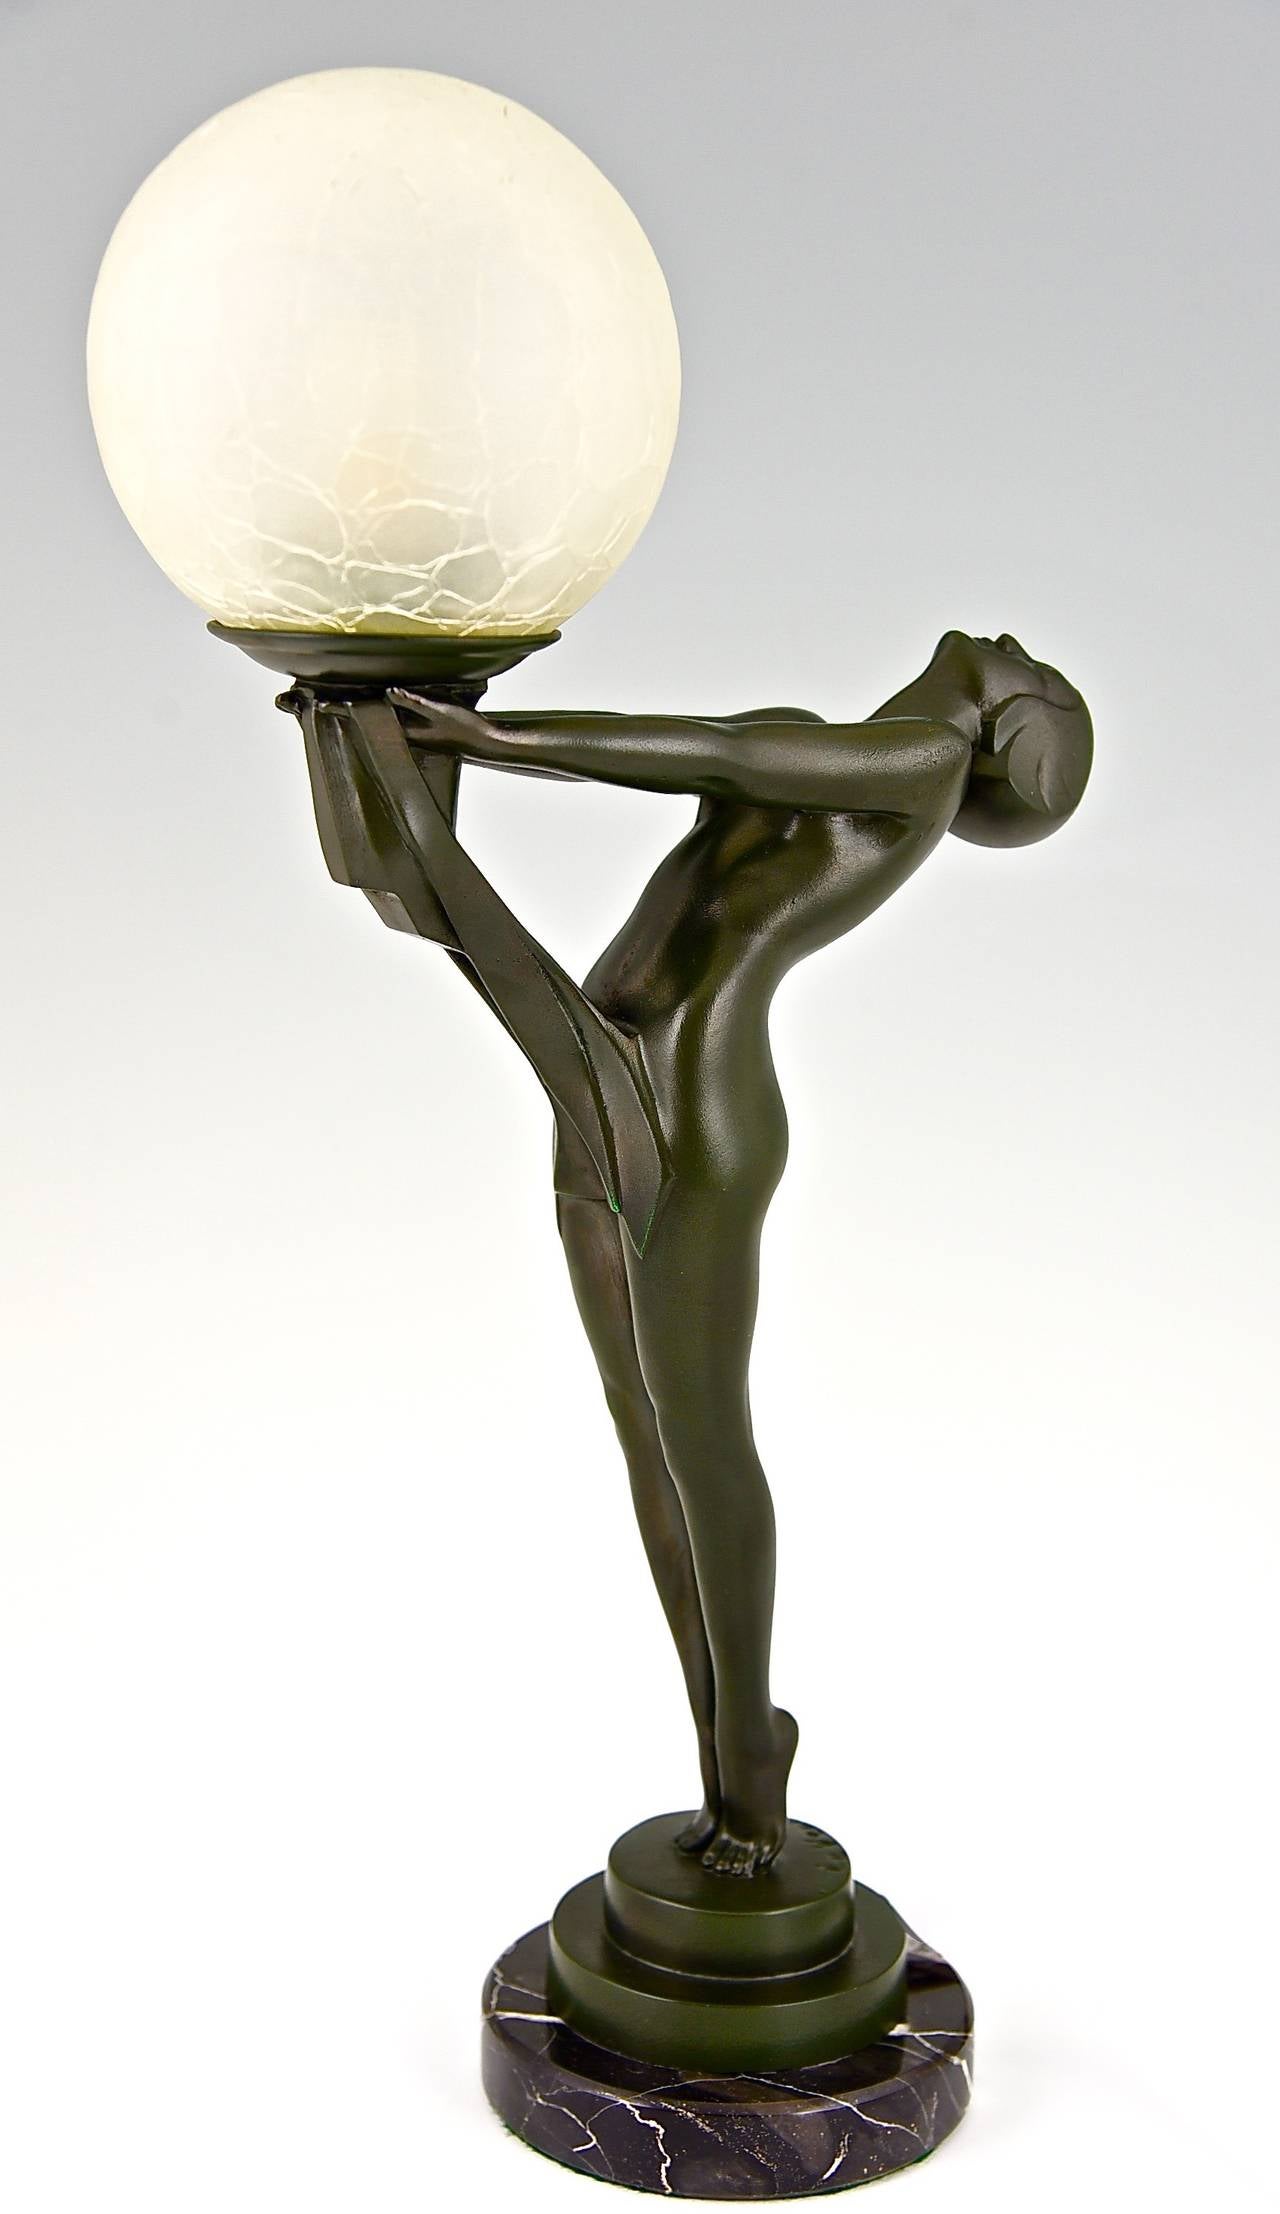 20th Century French Art Deco Figural Lamp of a Nude with Ball by Max Le Verrier